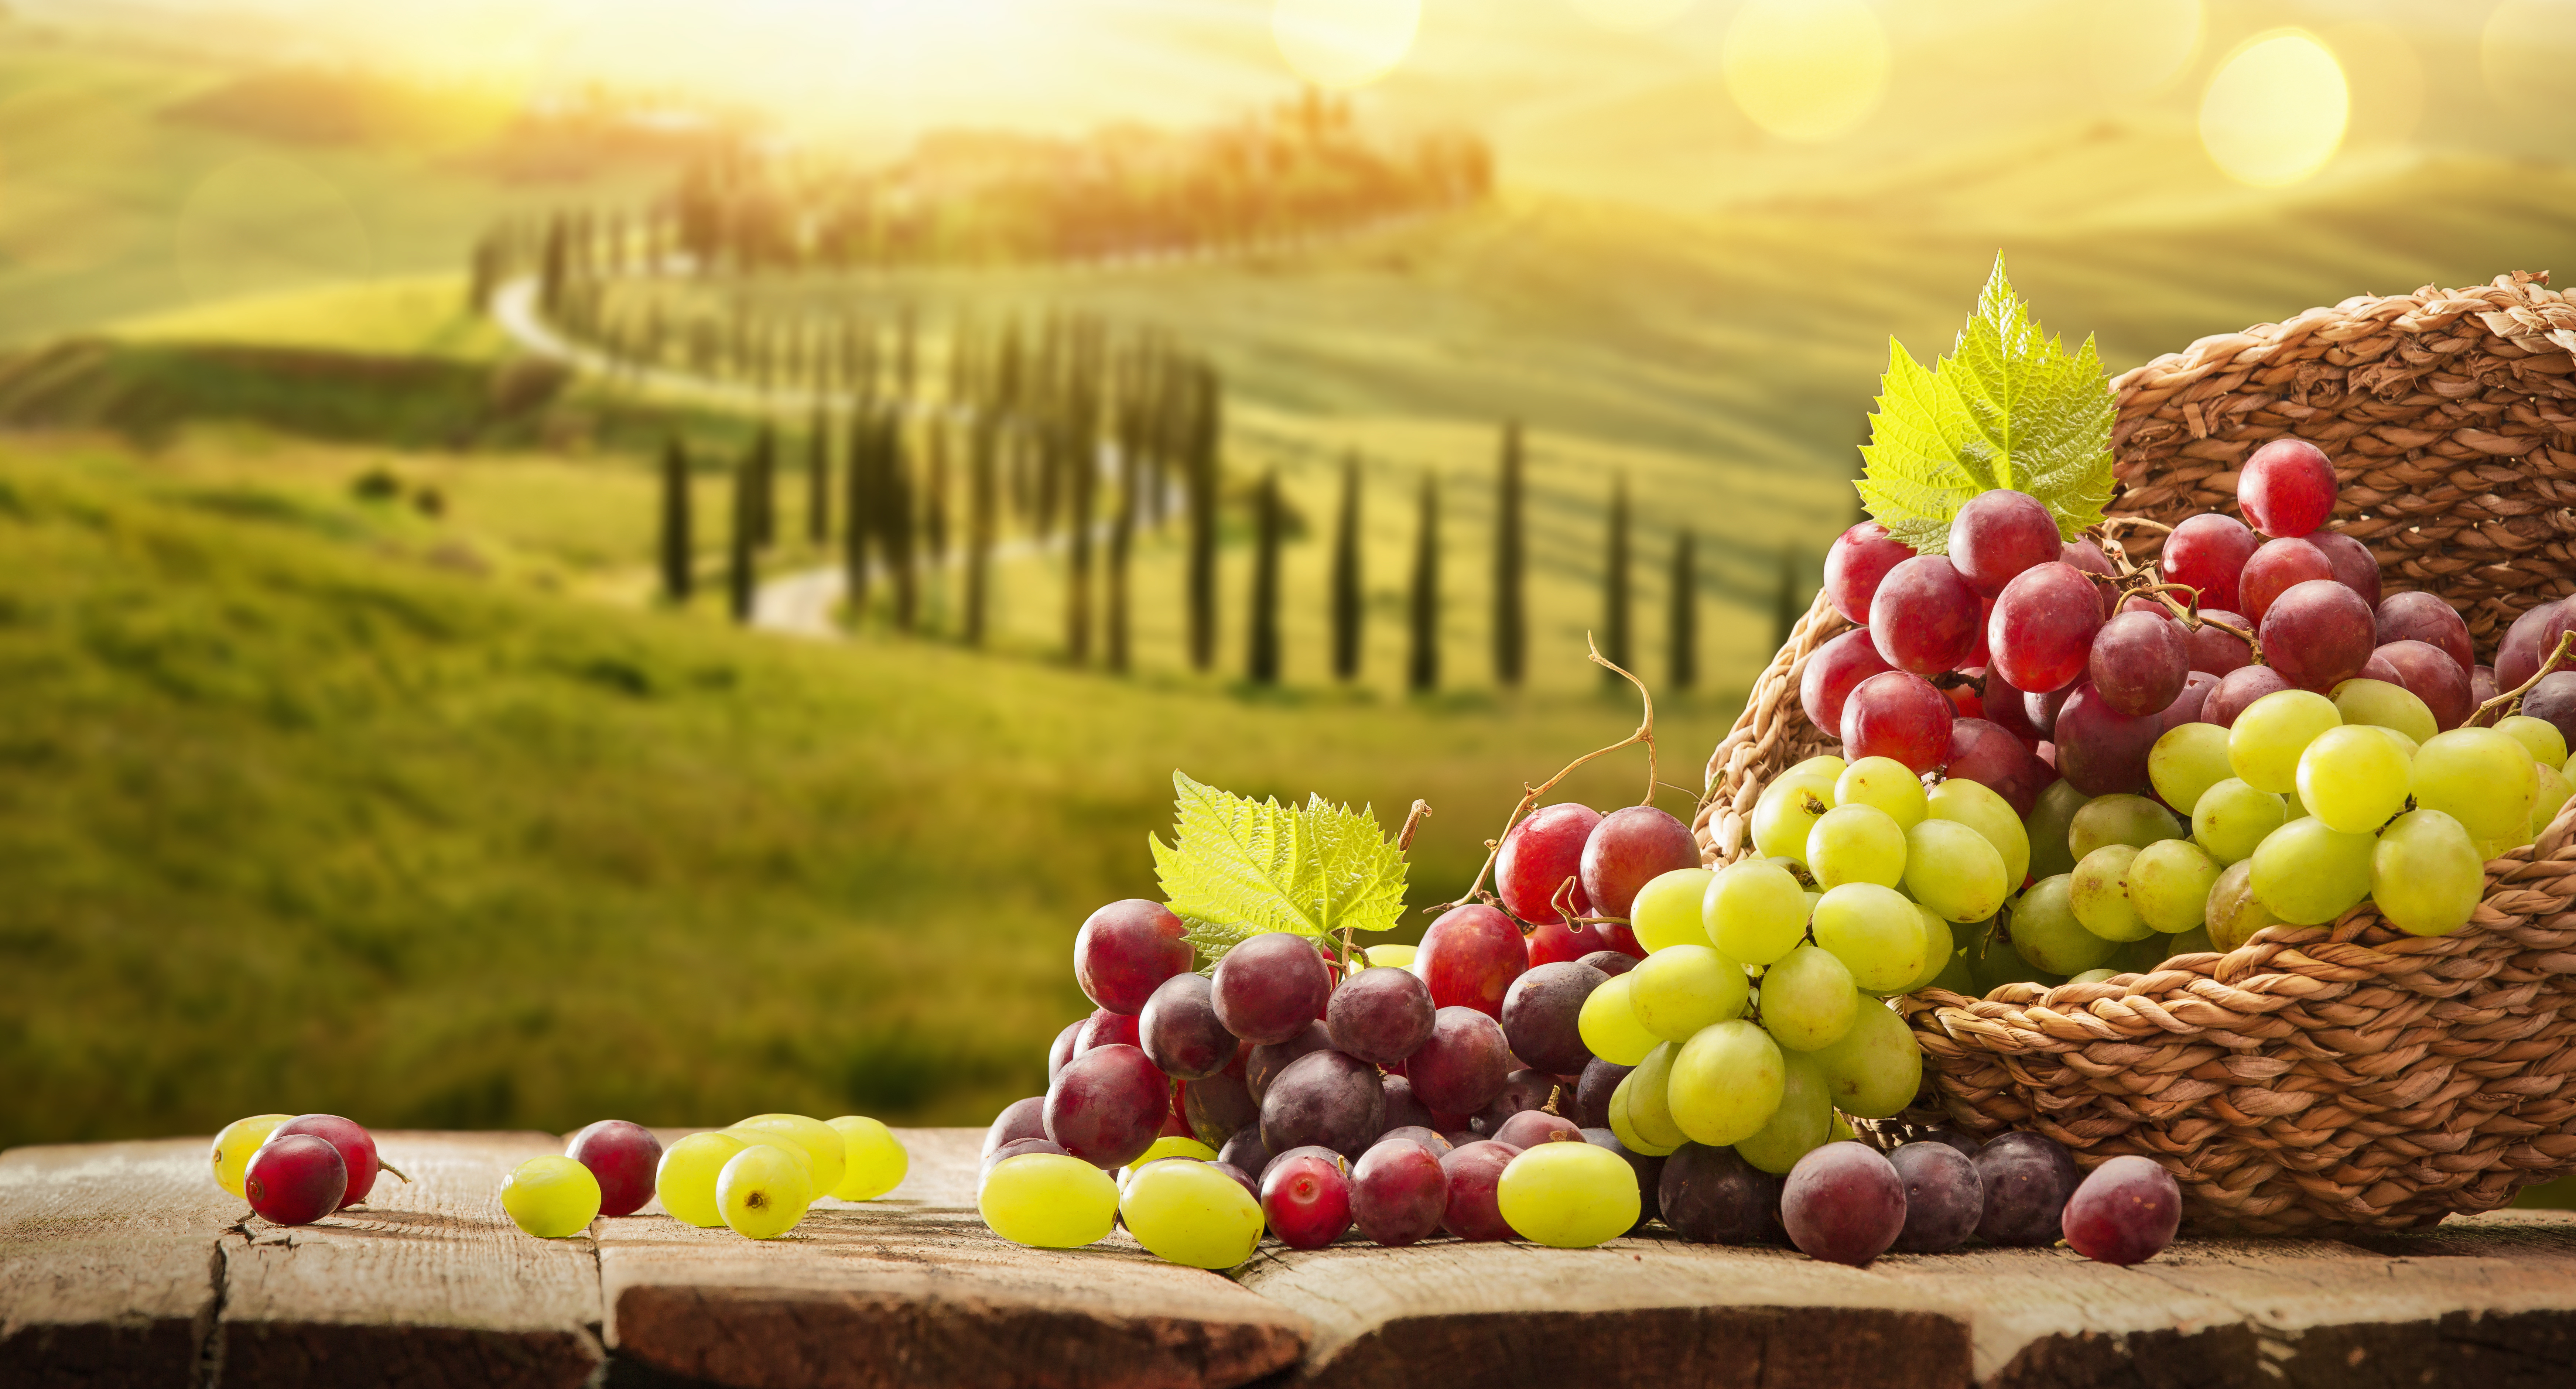 Grapes,In,A,Basket,On,A,Wooden,Background ,Harvesting